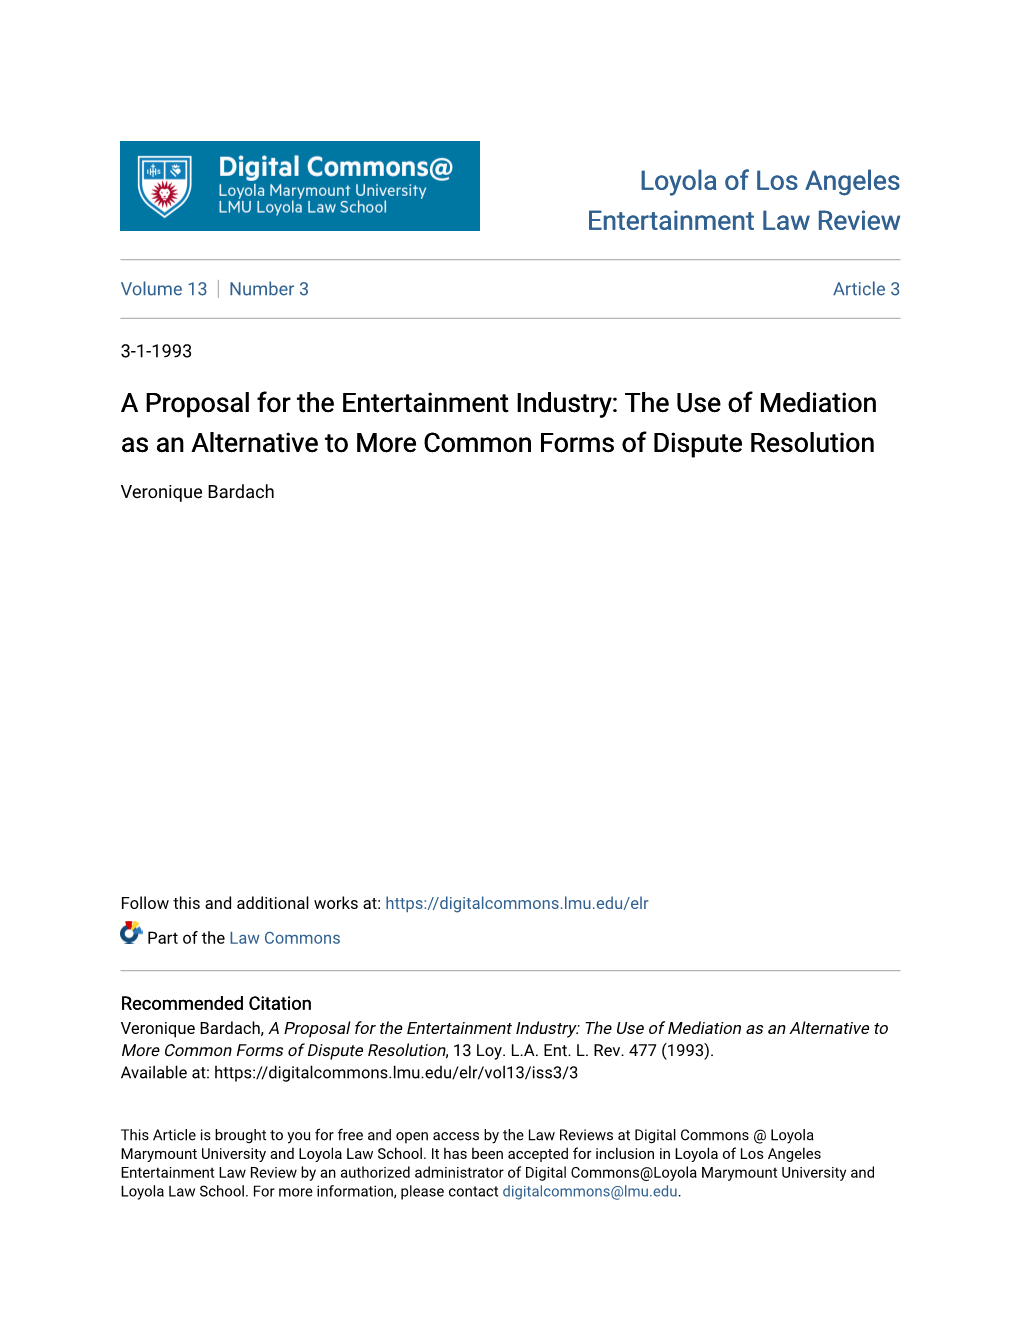 A Proposal for the Entertainment Industry: the Use of Mediation As an Alternative to More Common Forms of Dispute Resolution